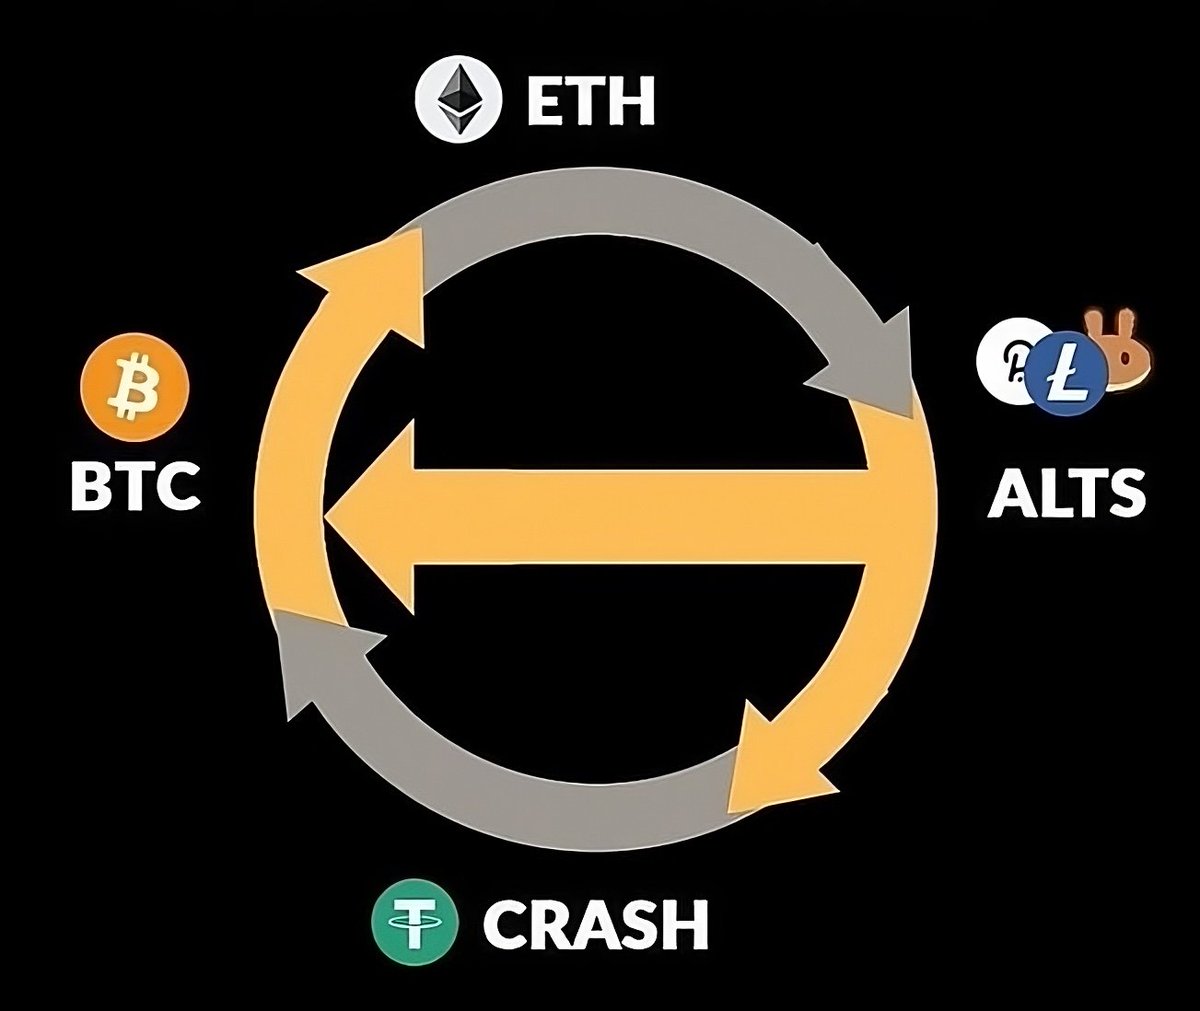 #money flow in #cryptoarea 
#BTC -> #ETH -> #ALTs -> #Stables
this idea is more for speculation and profitable 
#cryptocollaboration #Cryptopedia #bitcoininvestment